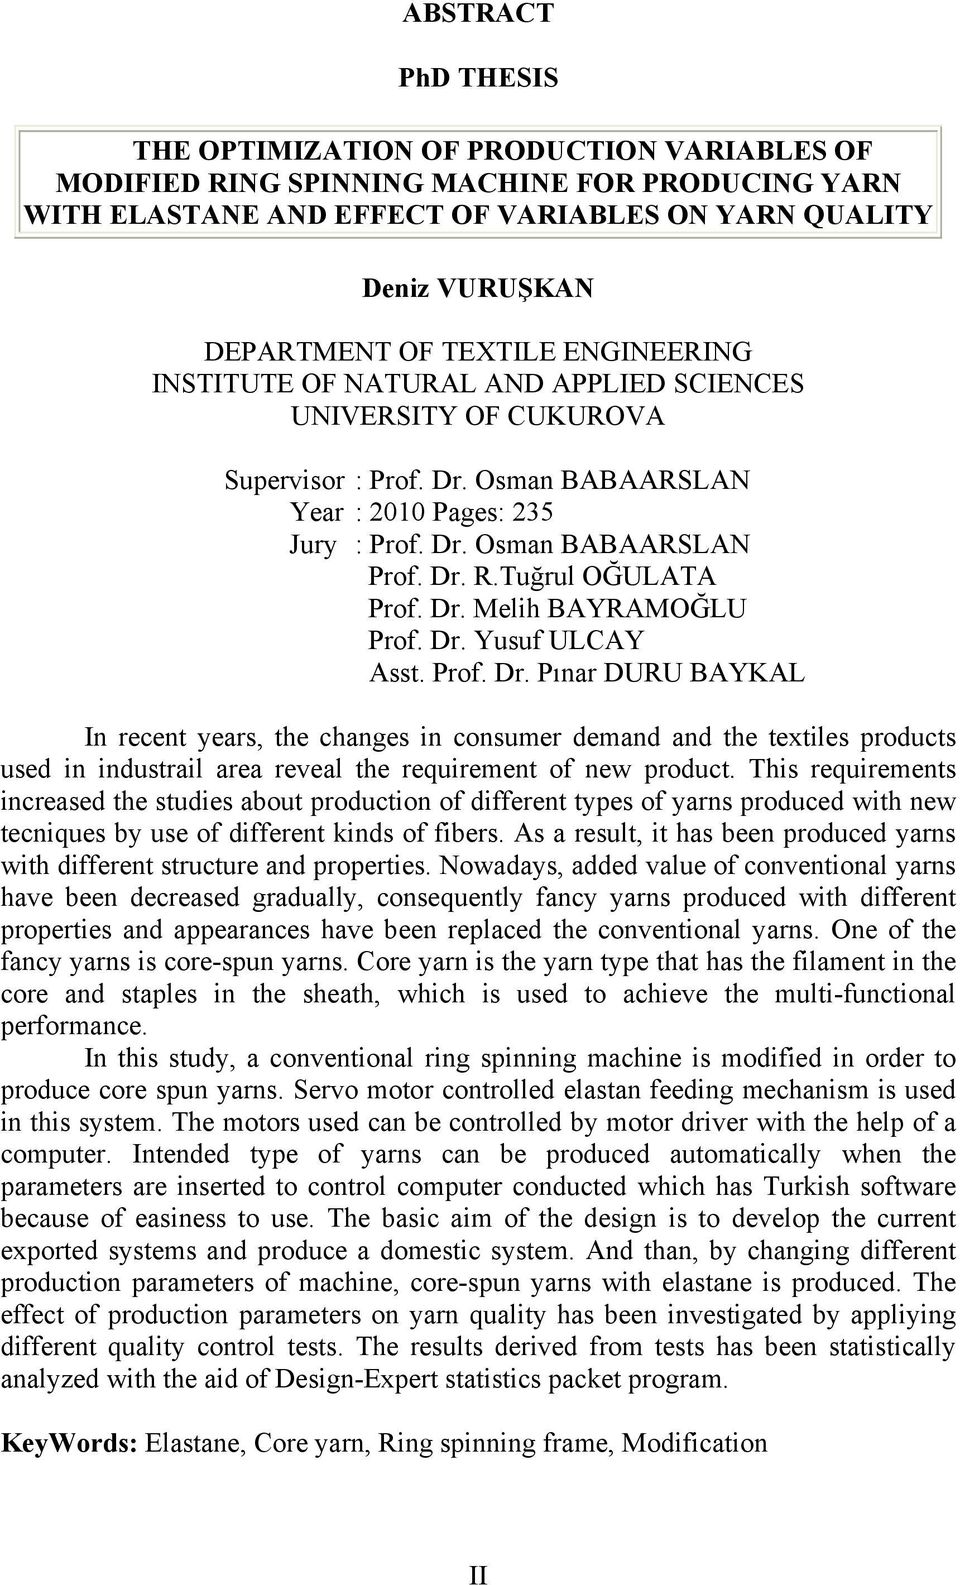 Tuğrul OĞULATA Prof. Dr. Melih BAYRAMOĞLU Prof. Dr. Yusuf ULCAY Asst. Prof. Dr. Pınar DURU BAYKAL In recent years, the changes in consumer demand and the textiles products used in industrail area reveal the requirement of new product.